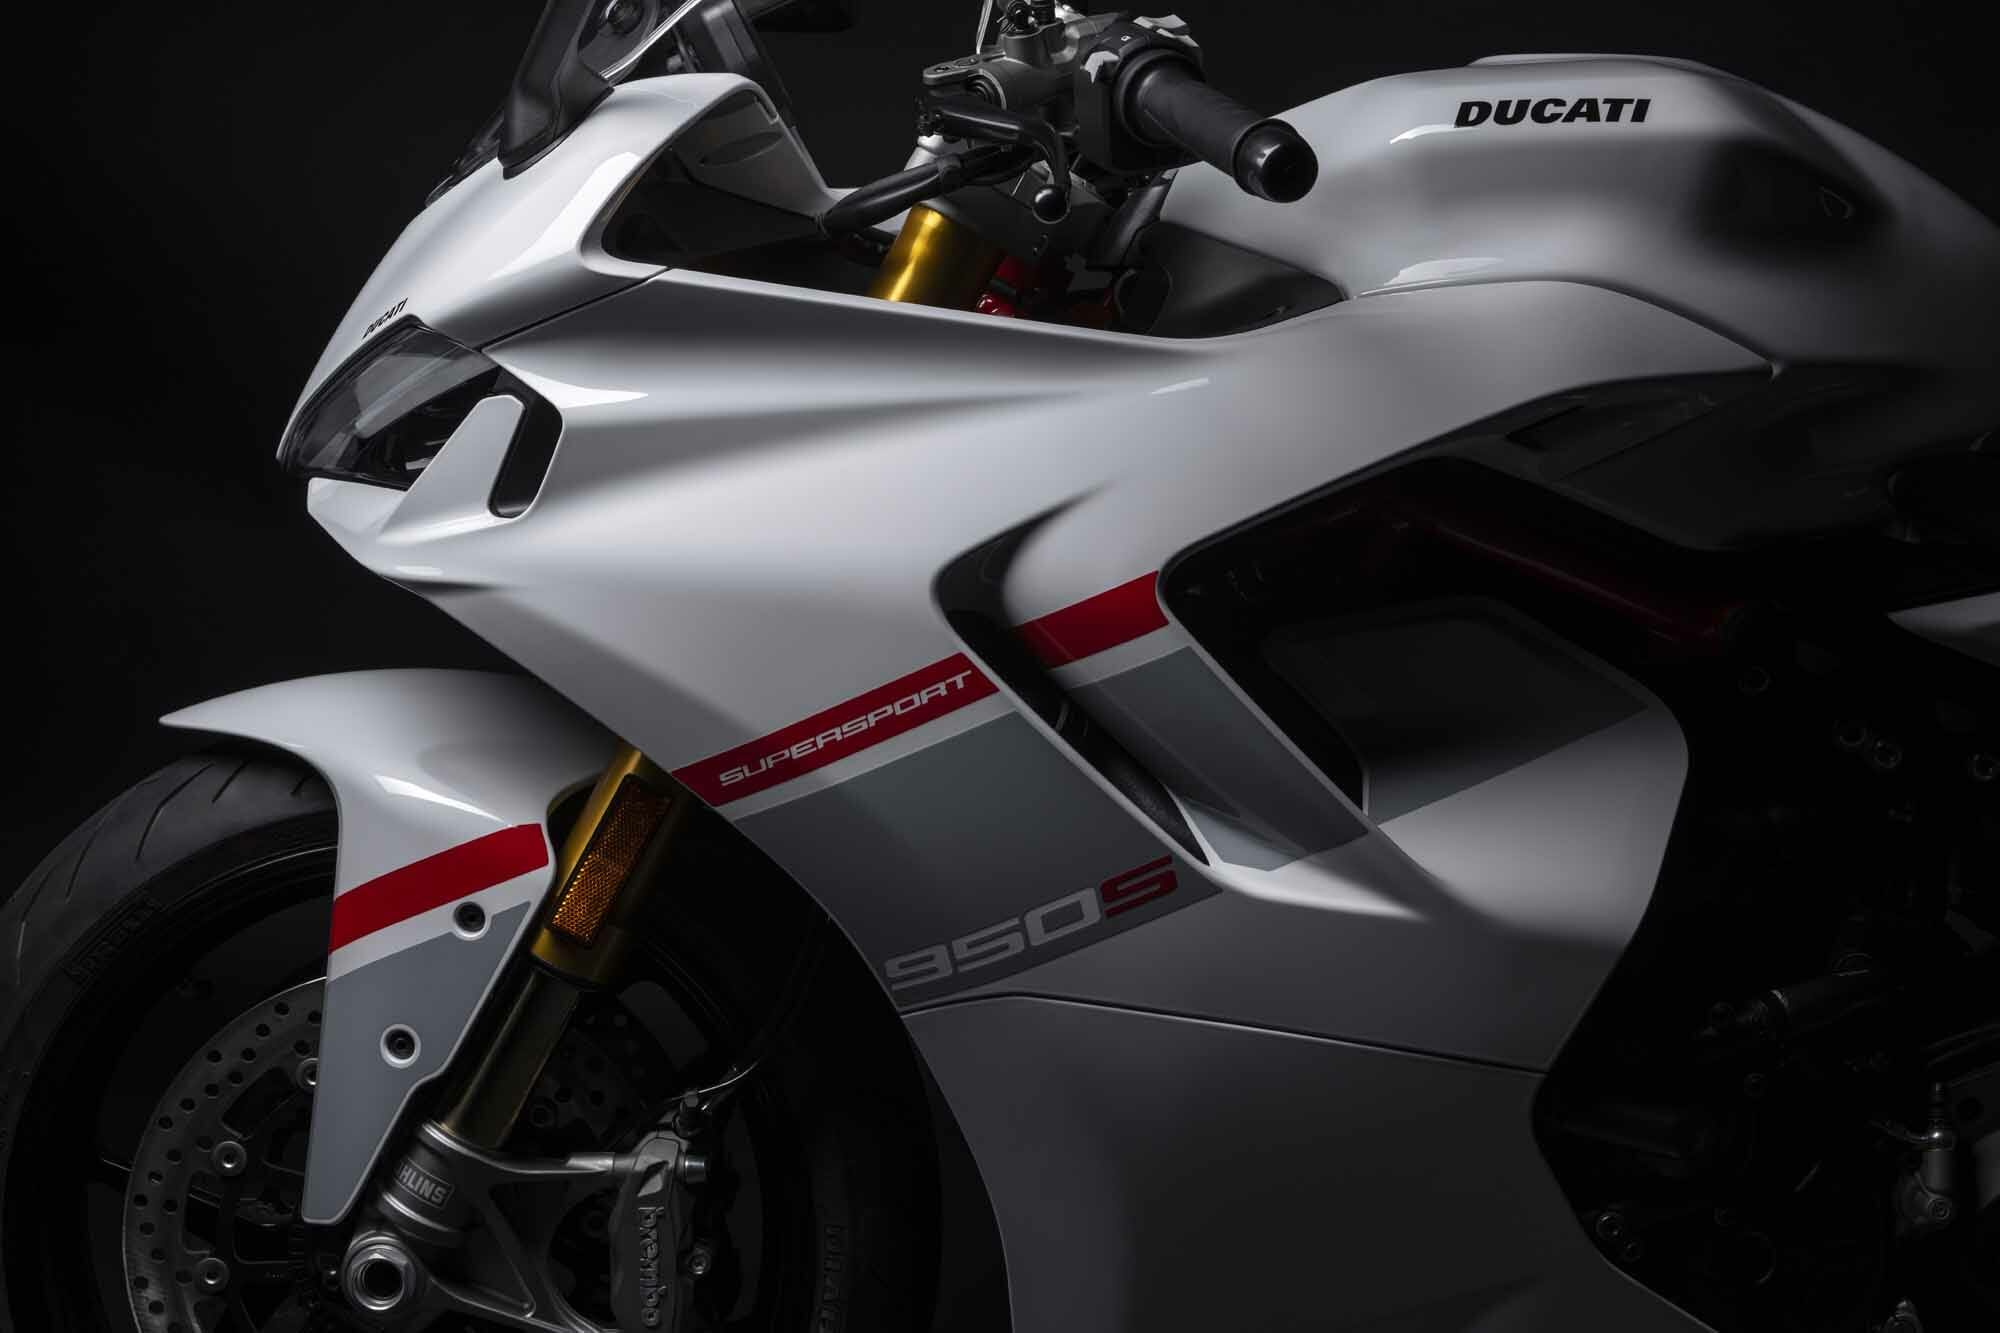 Fresh coat of paint: Ducati SuperSport 950 S shines in “Stripe Livery